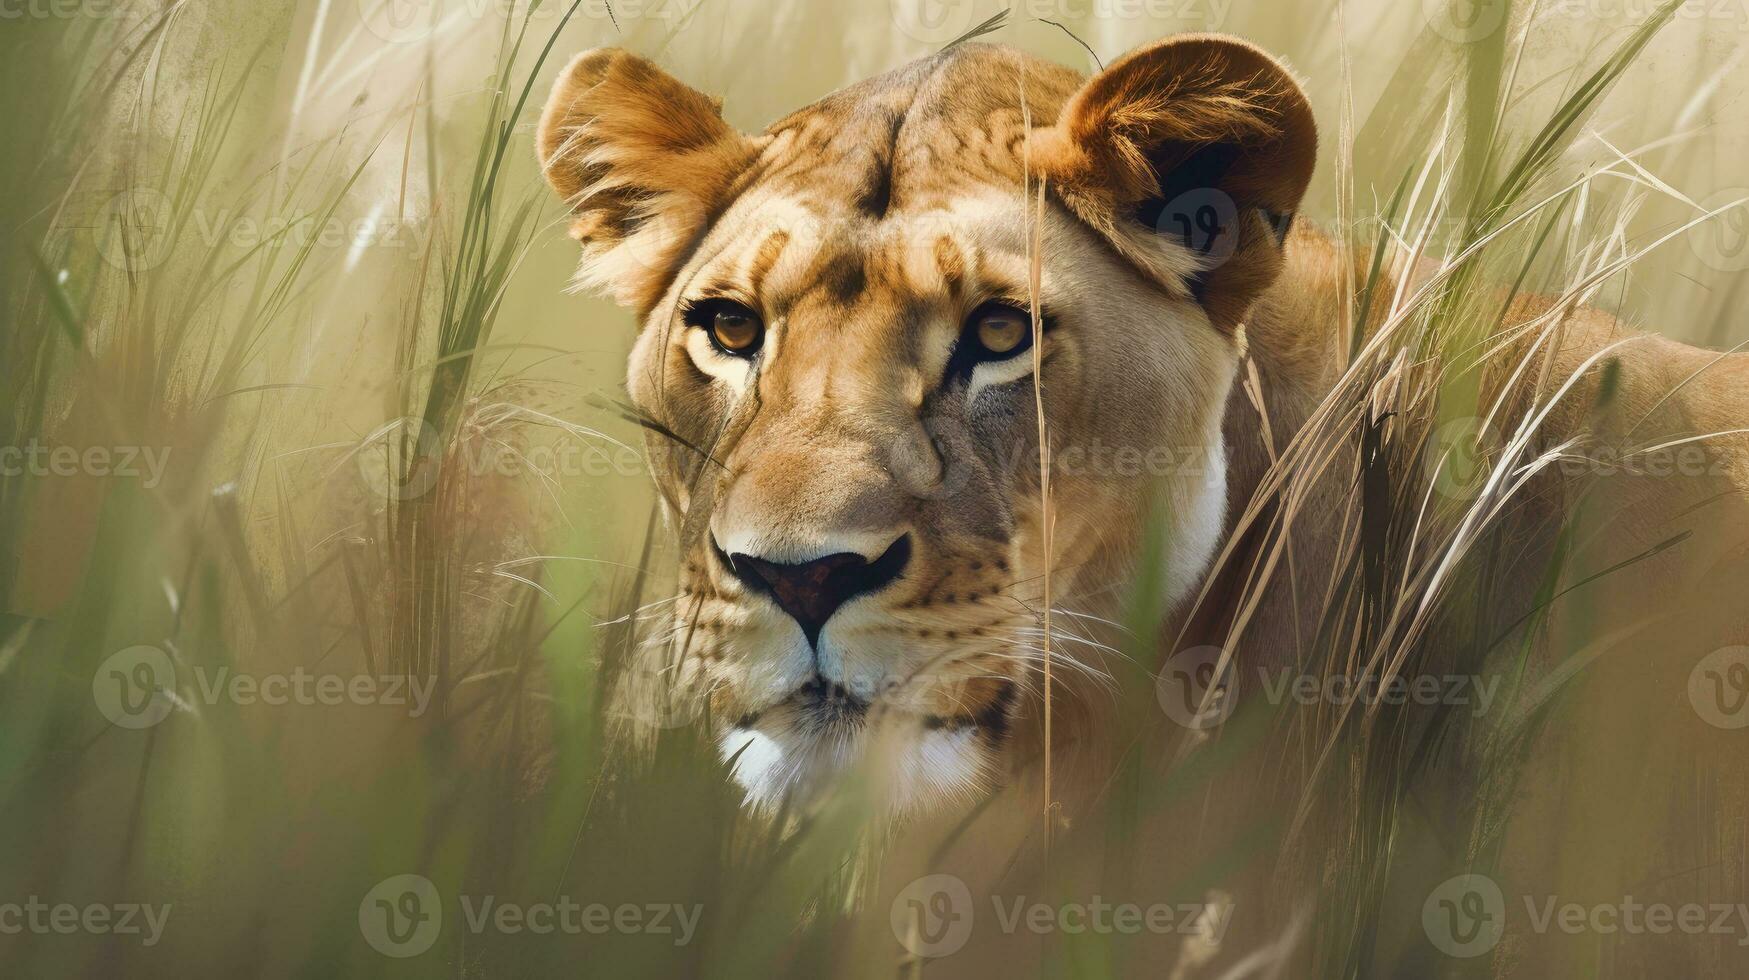 A lioness stalking through the tall grass, with only her piercing eyes visible, capturing the lion's stealth and hunting prowess photo